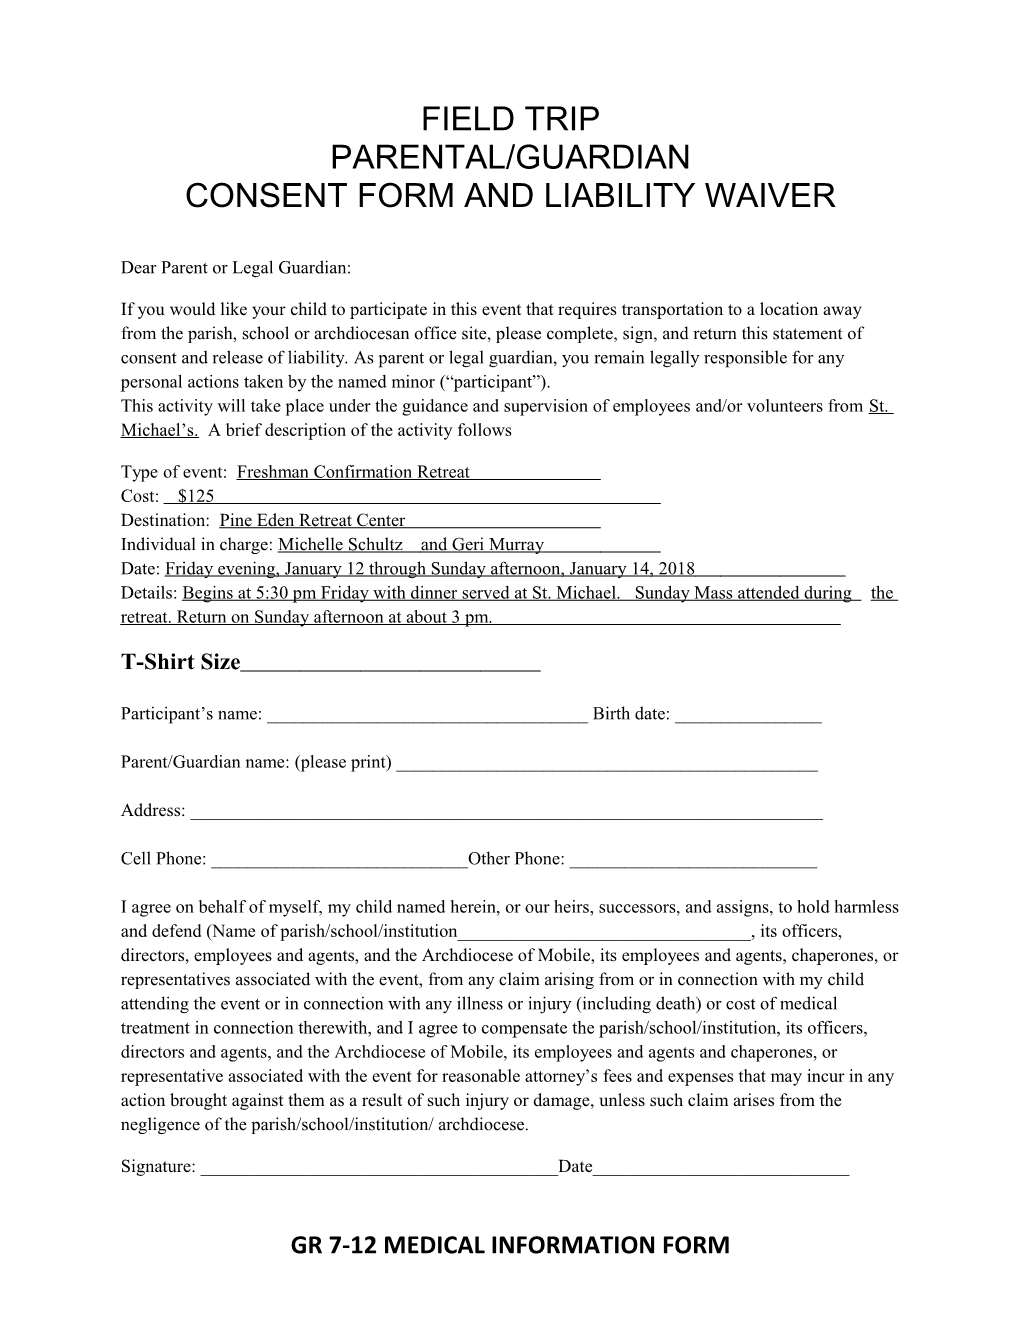 Consent Form and Liability Waiver